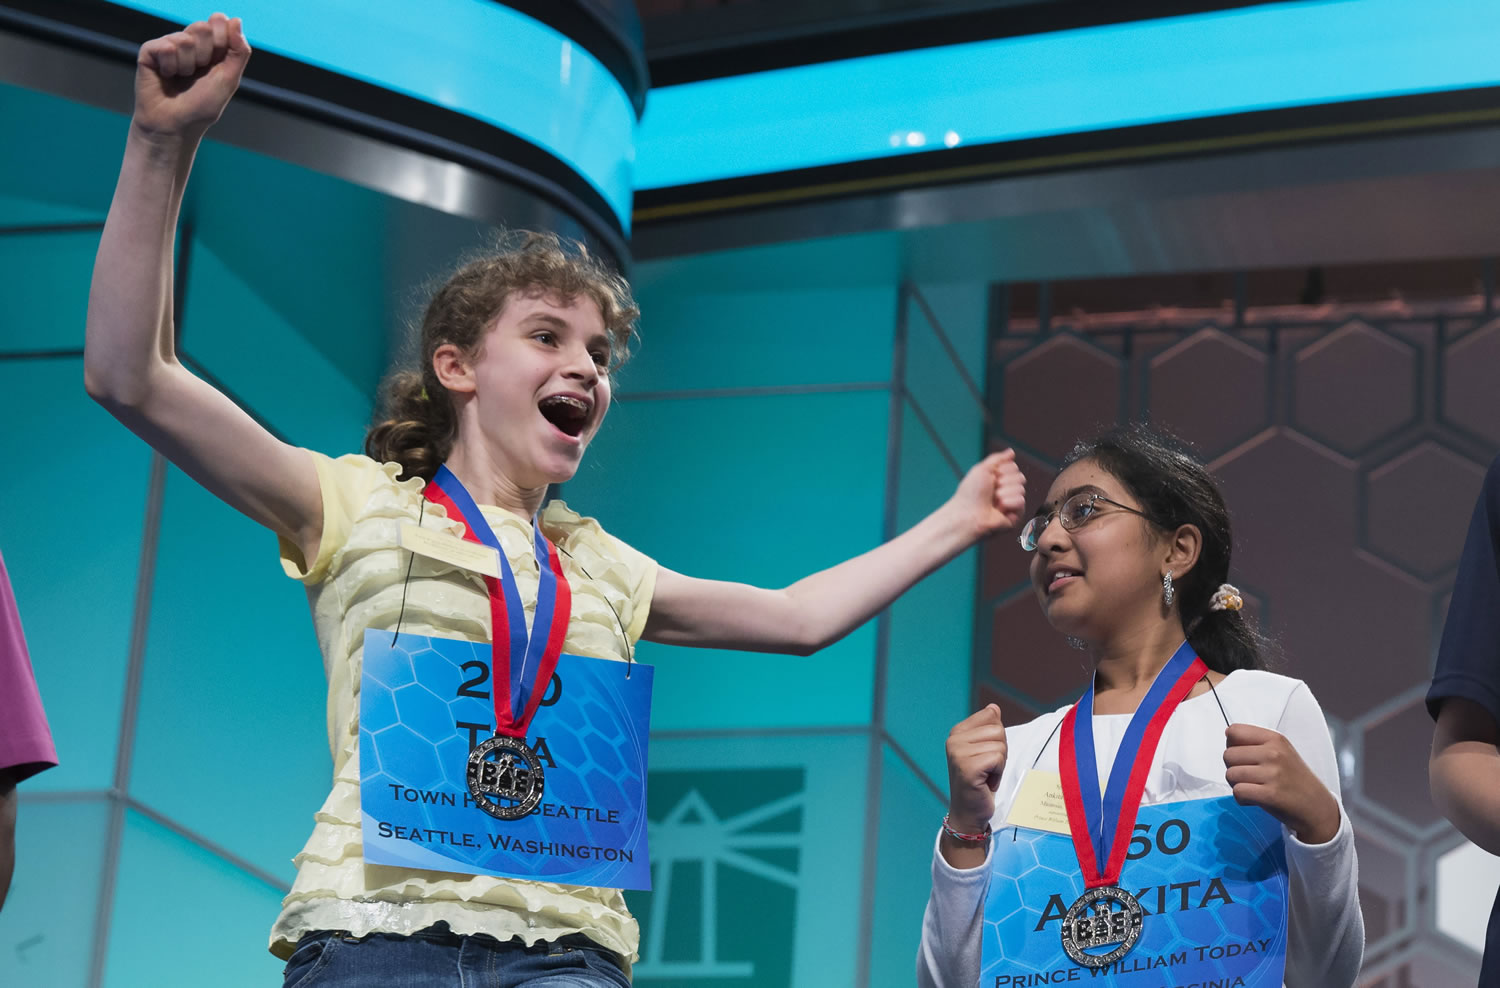 Tea Freedman-Susskind of Redmond, left, and Ankita Vadiala of Manassas, Va., qualify for the semifinal round of the National Spelling Bee in Oxon Hill, Md.